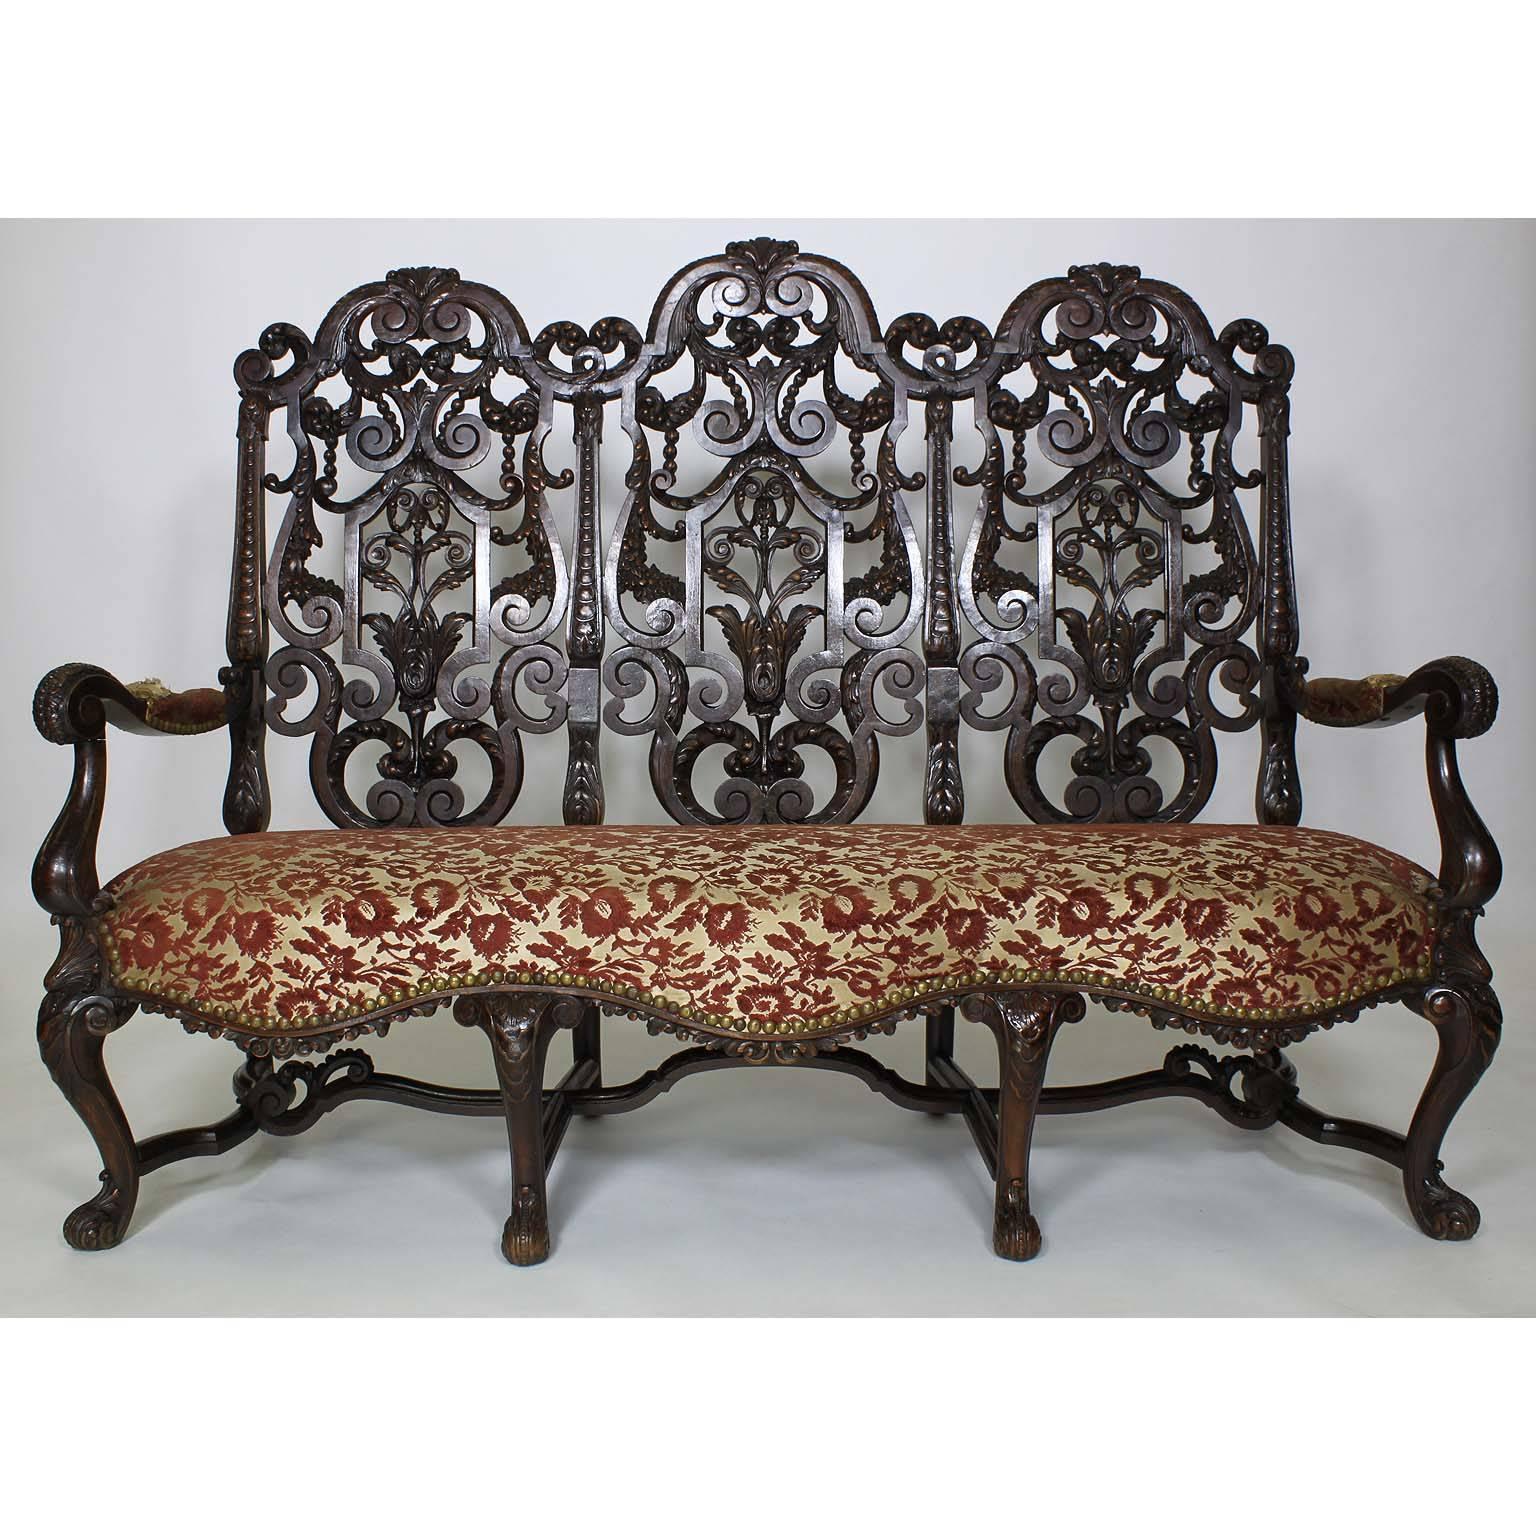 A Fine Anglo-Dutch 19th Century Baroque Style Ornately Carved Walnut Five Piece Parlor - Salon Suite, After Daniel Marot (French-Dutch, 1661–1752); comprising of a settee, two armchairs and two side chairs. The intricately pierced high-backs carved